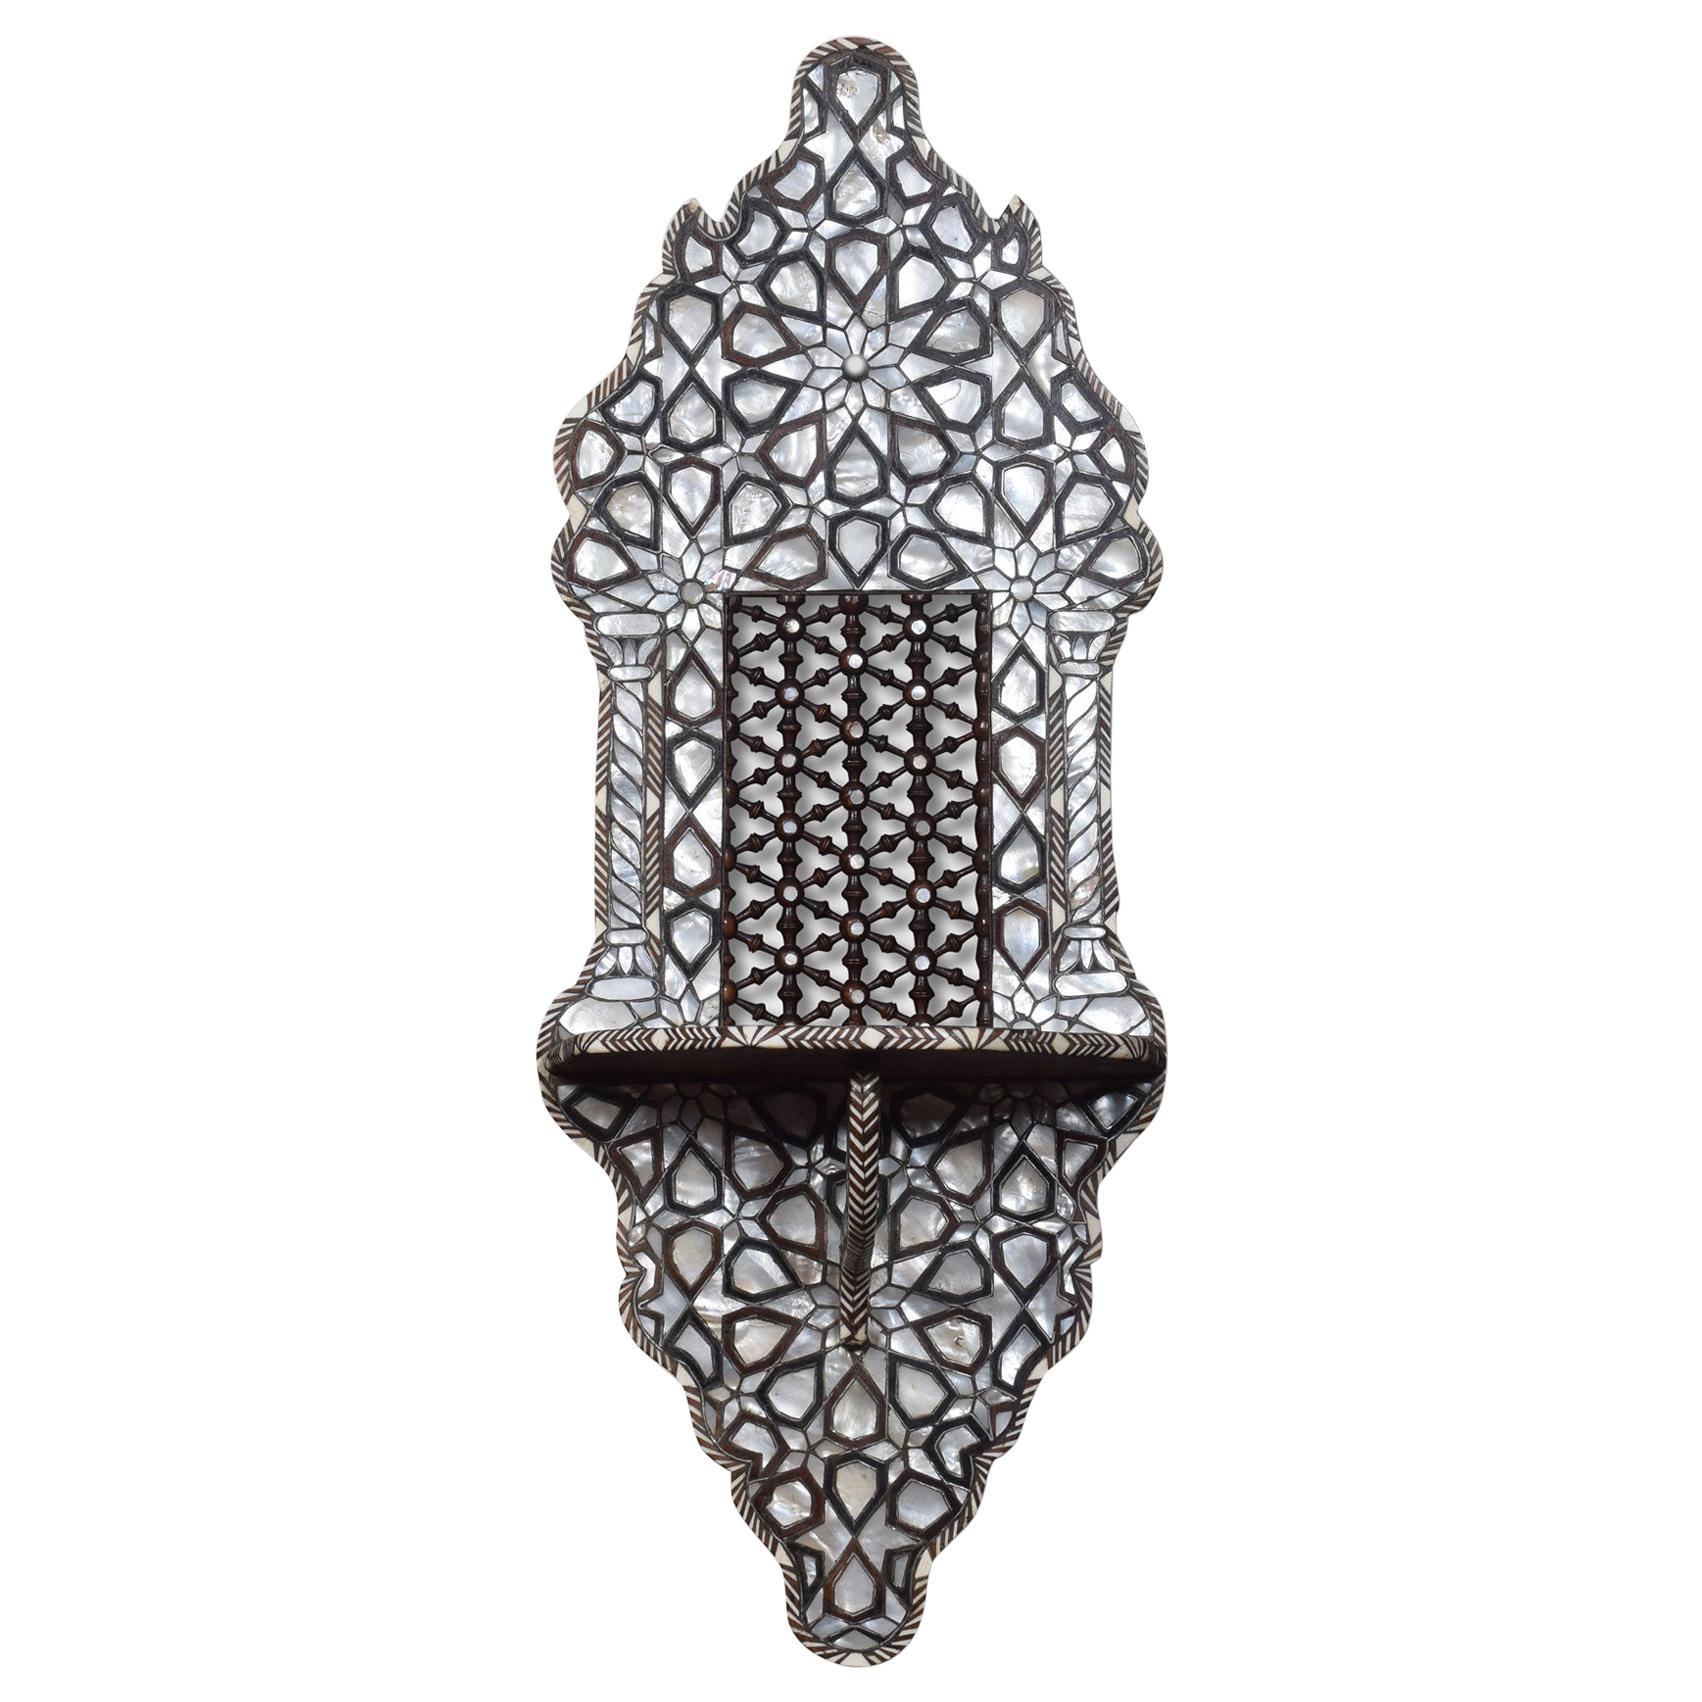 Ottoman Hardwood Mother of Pearl Bone and Silver Inlaid Wall Bracket